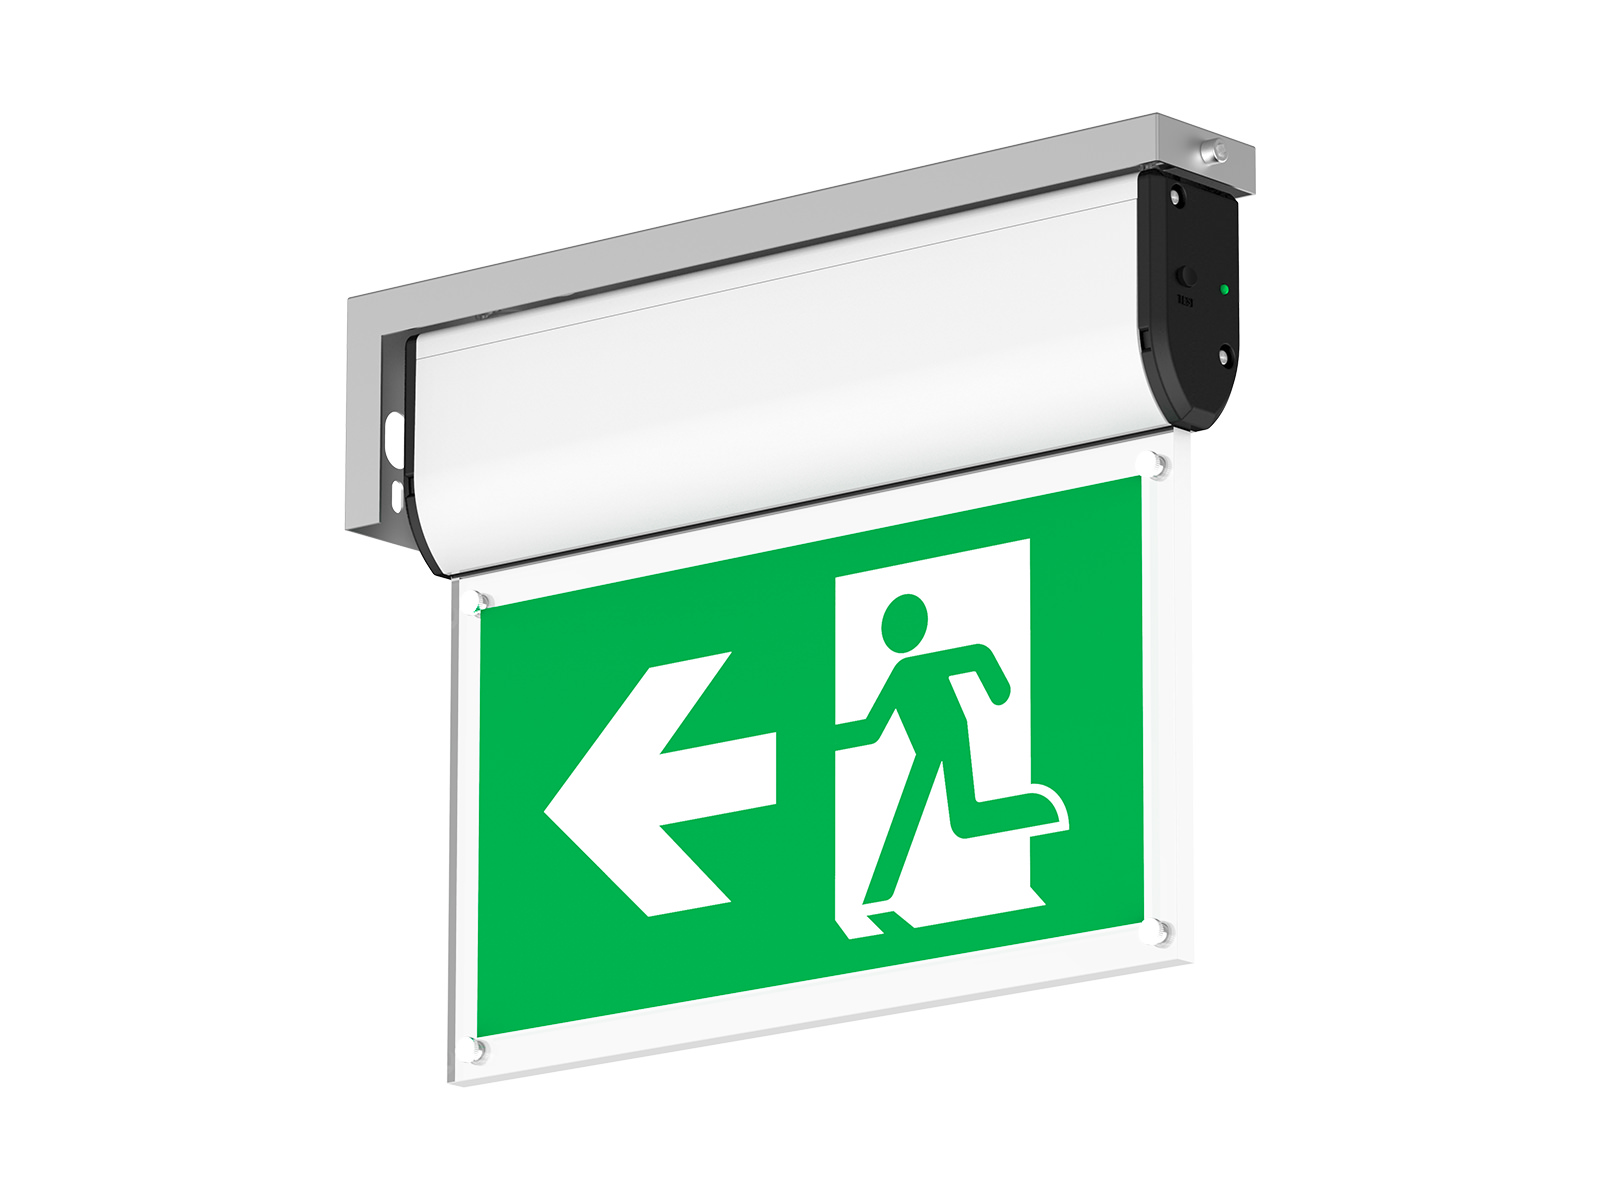 EPE EX2 LED Exit Sign Side Mounting